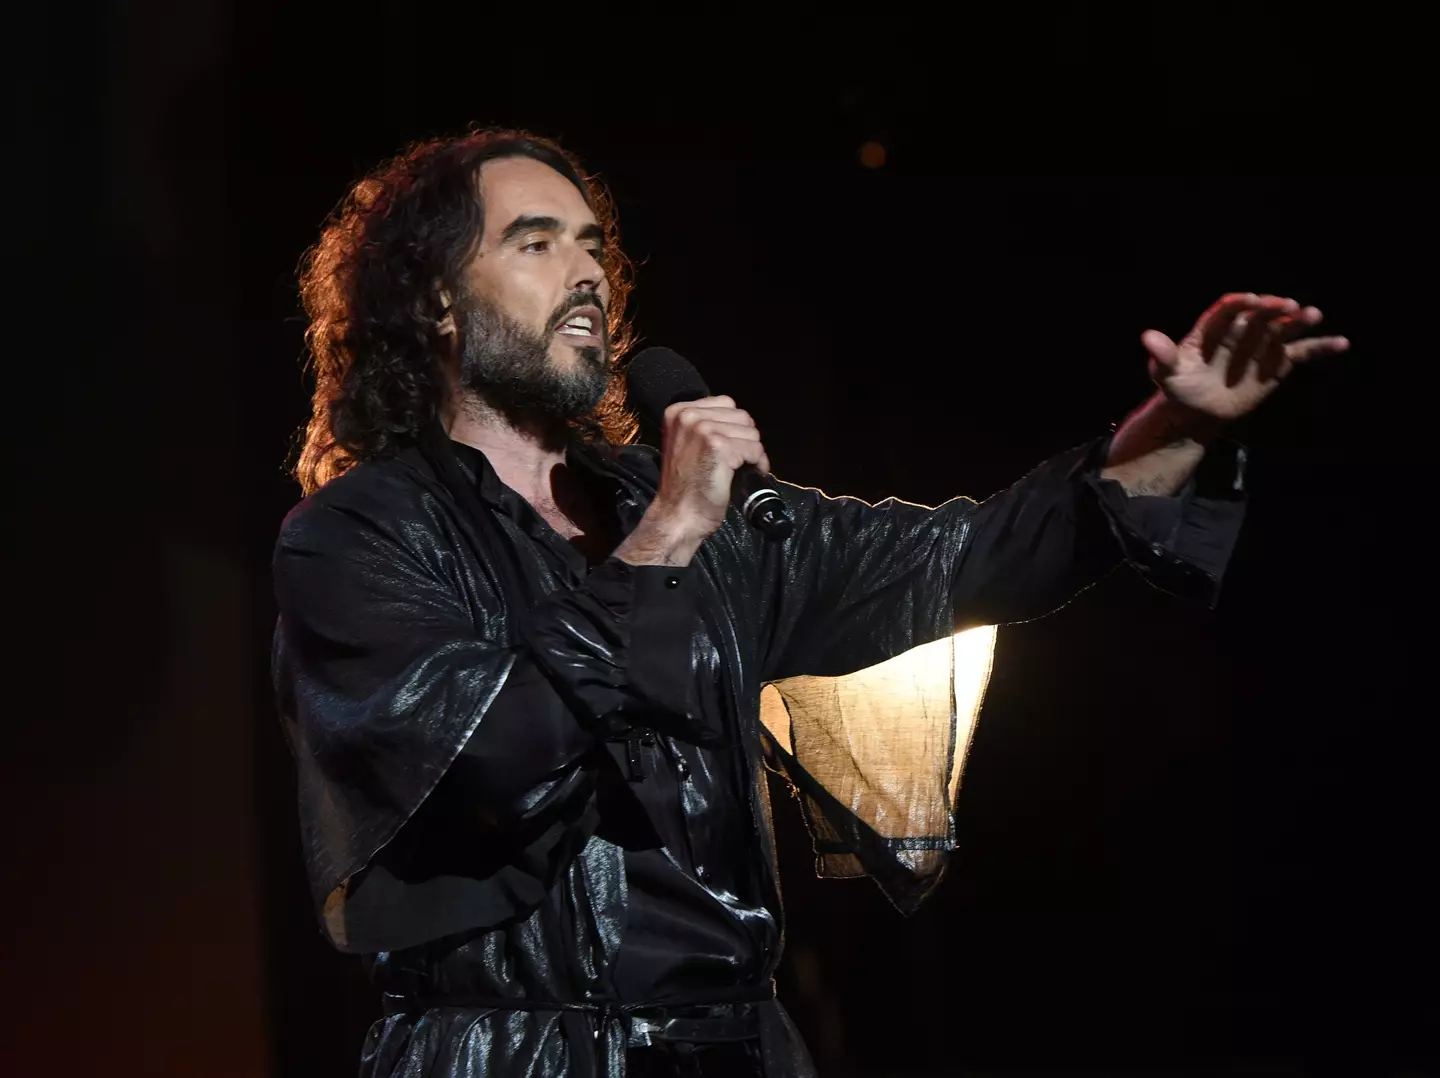 Russell Brand has denied the allegations made against him in the recent investigation.